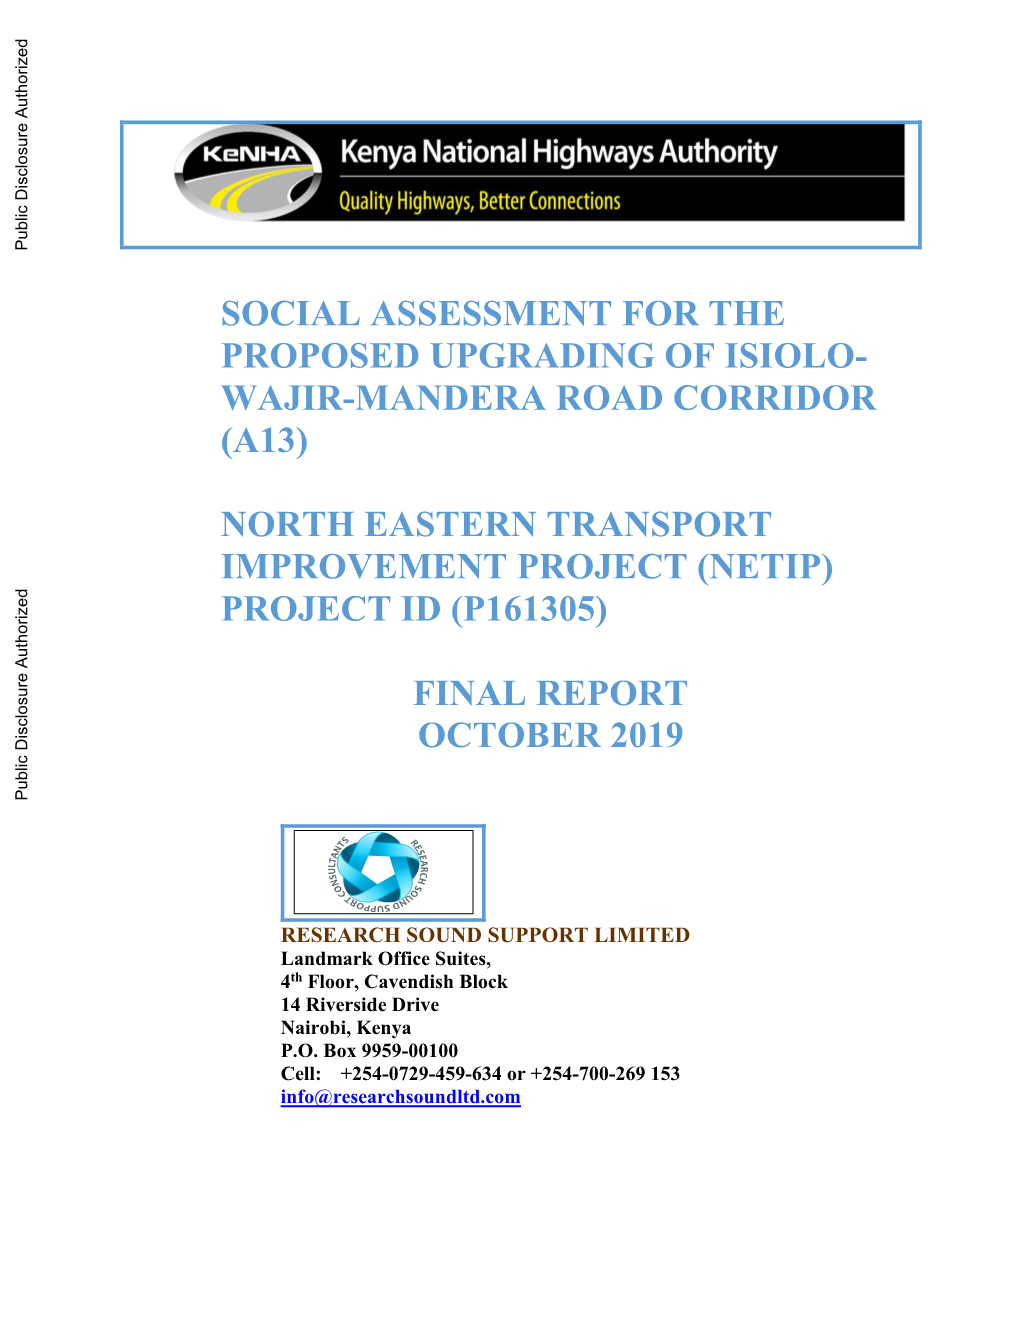 Social Assessment for the Proposed Upgrading of Isiolo- Wajir-Mandera Road Corridor (A13)